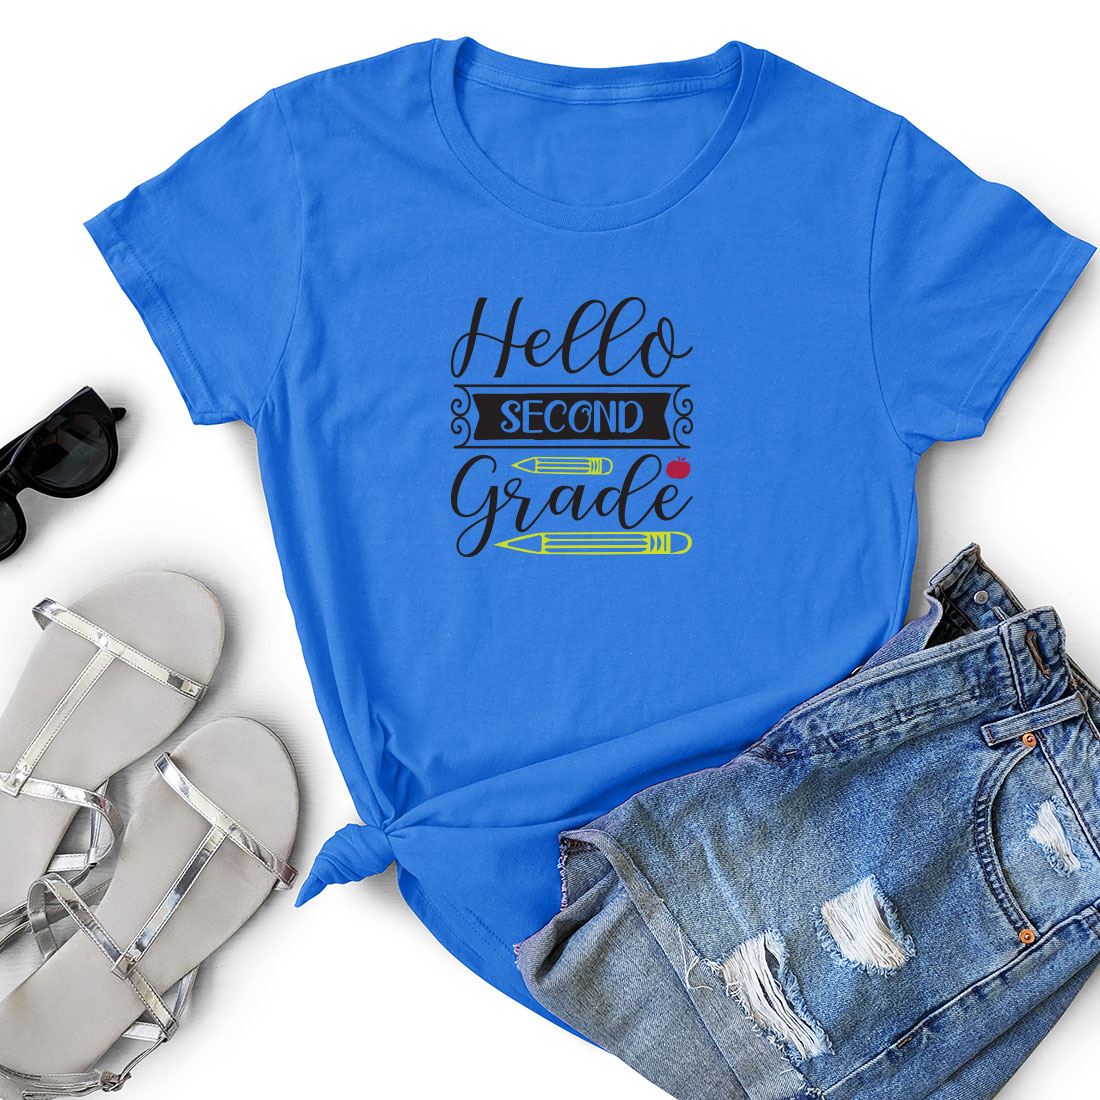 T - shirt that says hello second grade next to a pair of shorts.